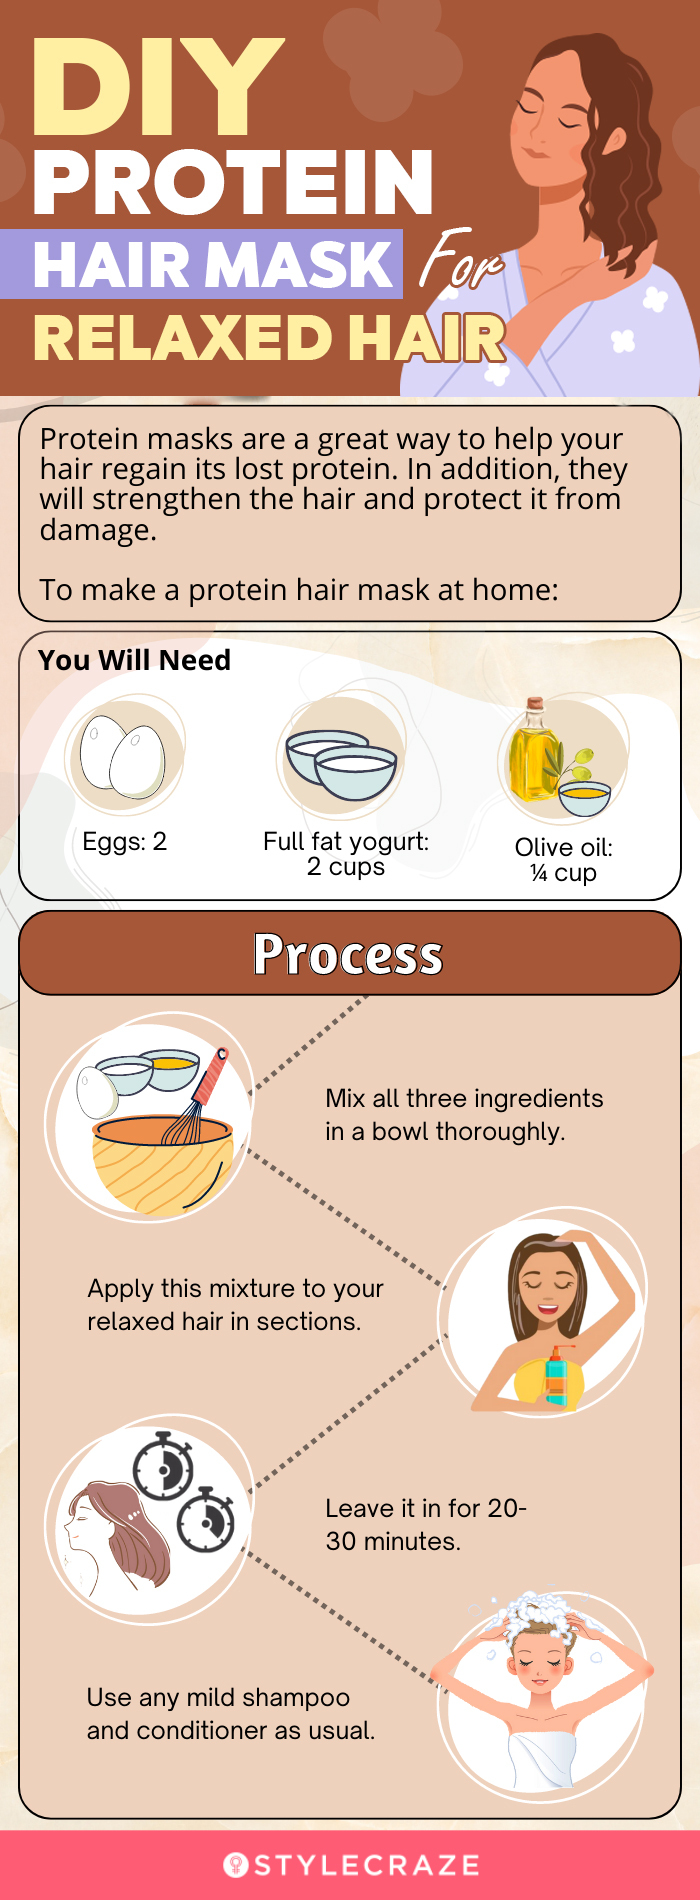 diy protein hair mask for relaxed hair [infographic]